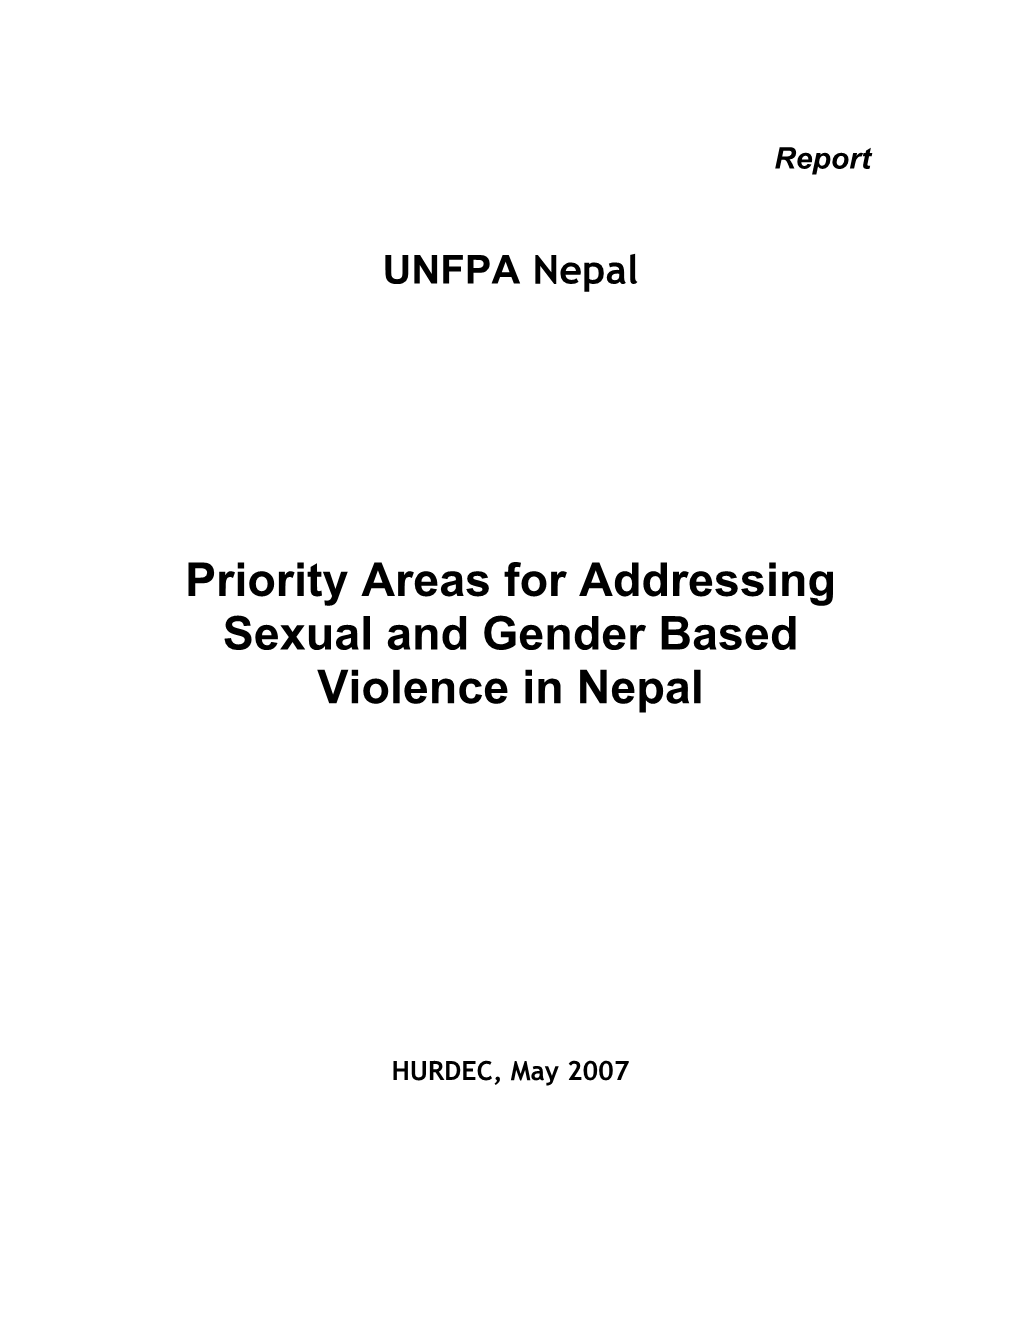 Priority Areas for Addressing Sexual and Gender Based Violence in Nepal